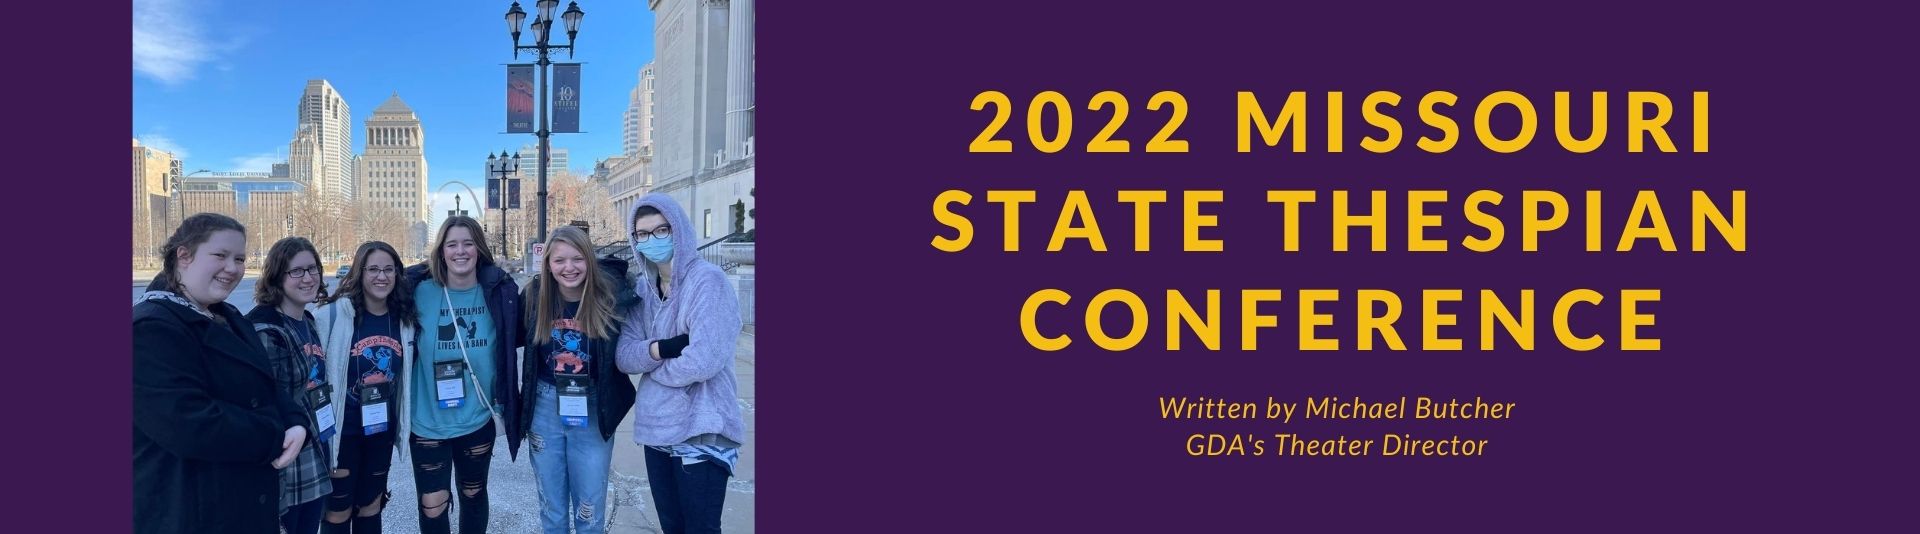 Gloria Deo Academy Blog 2022 Missouri State Thespian Conference